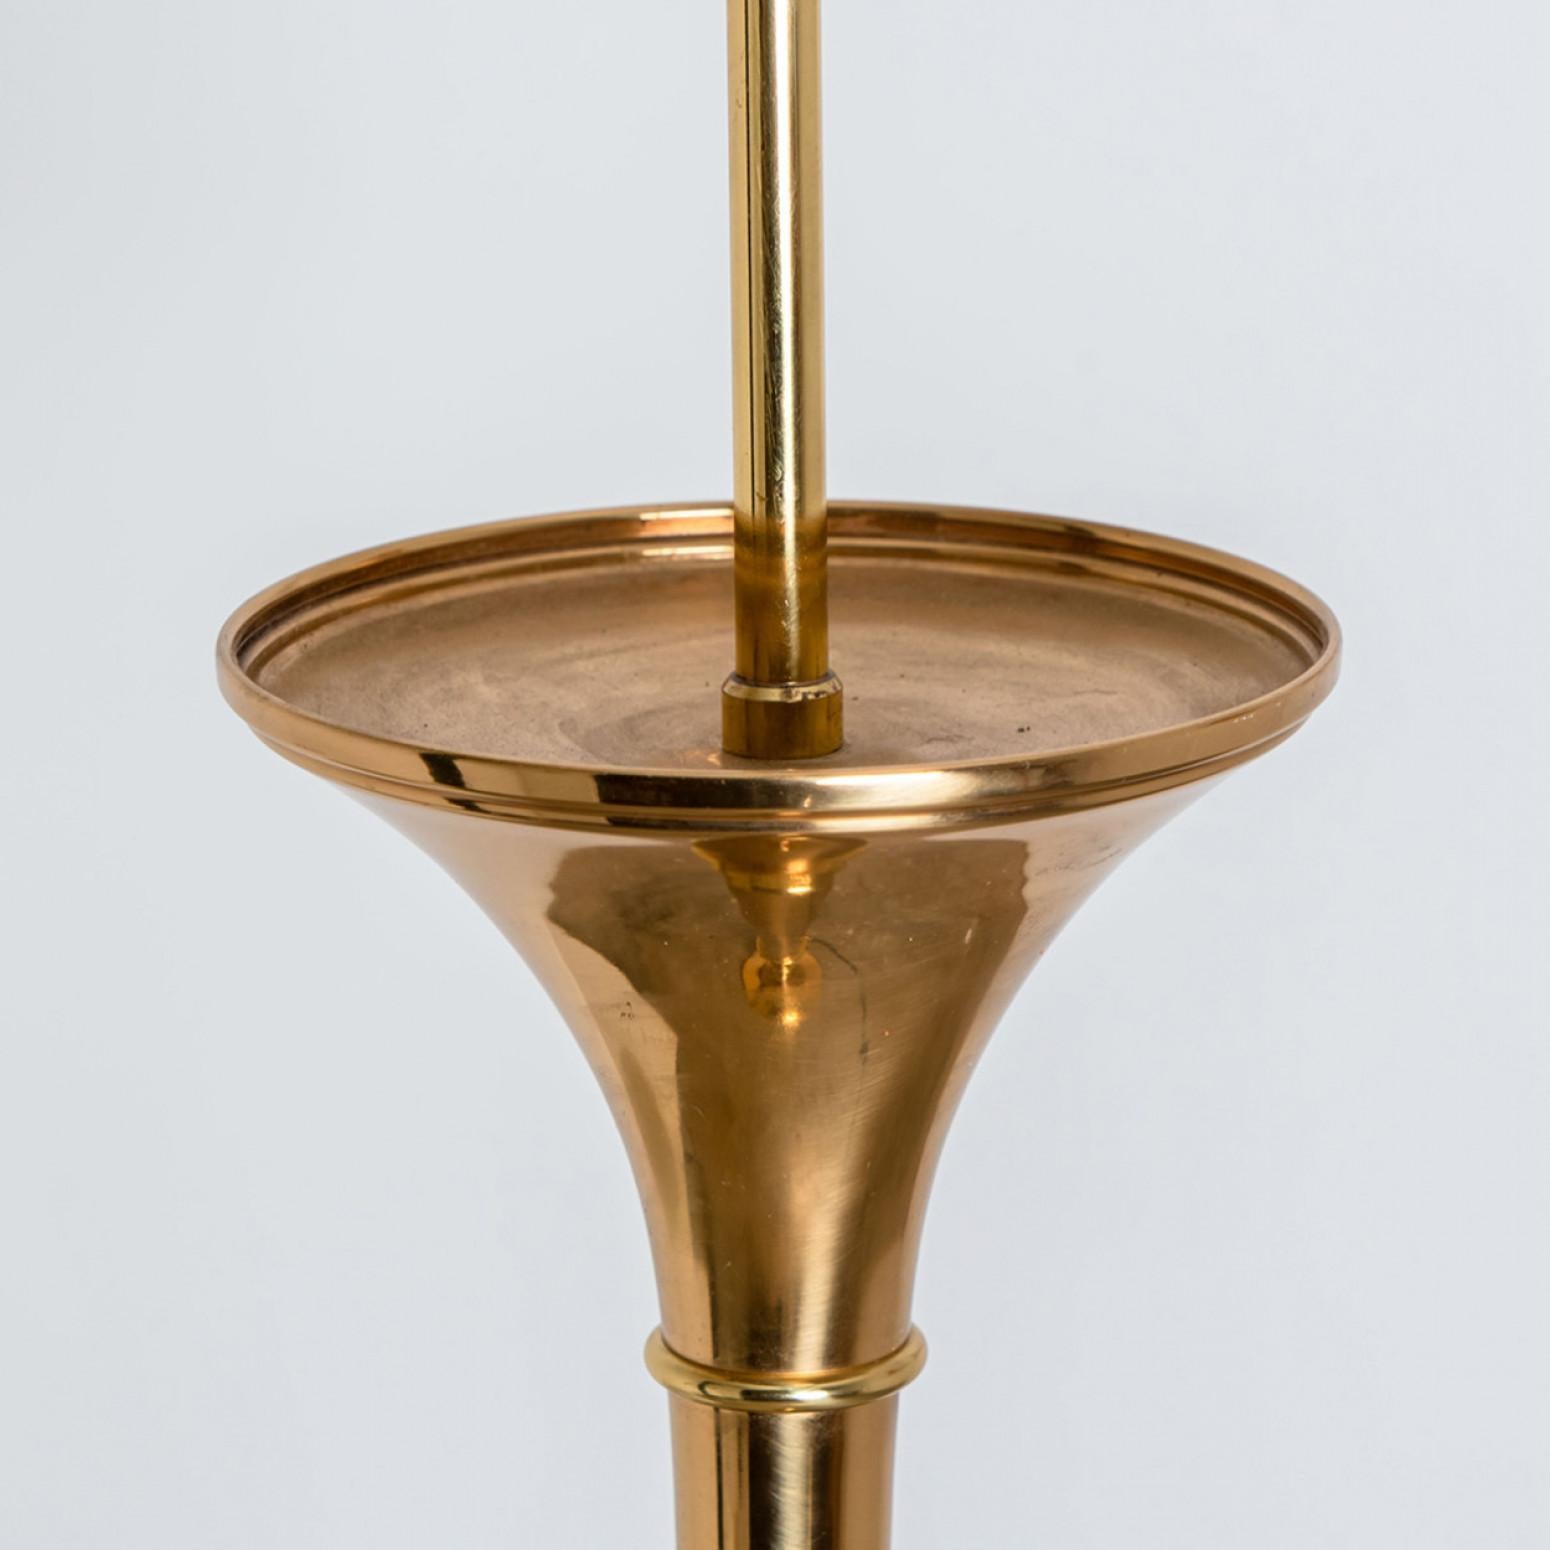 Other Pair of Floor Lamps Gold Brass and Bamoboo Shade by Ingo Maurer, Germany, 1968 For Sale